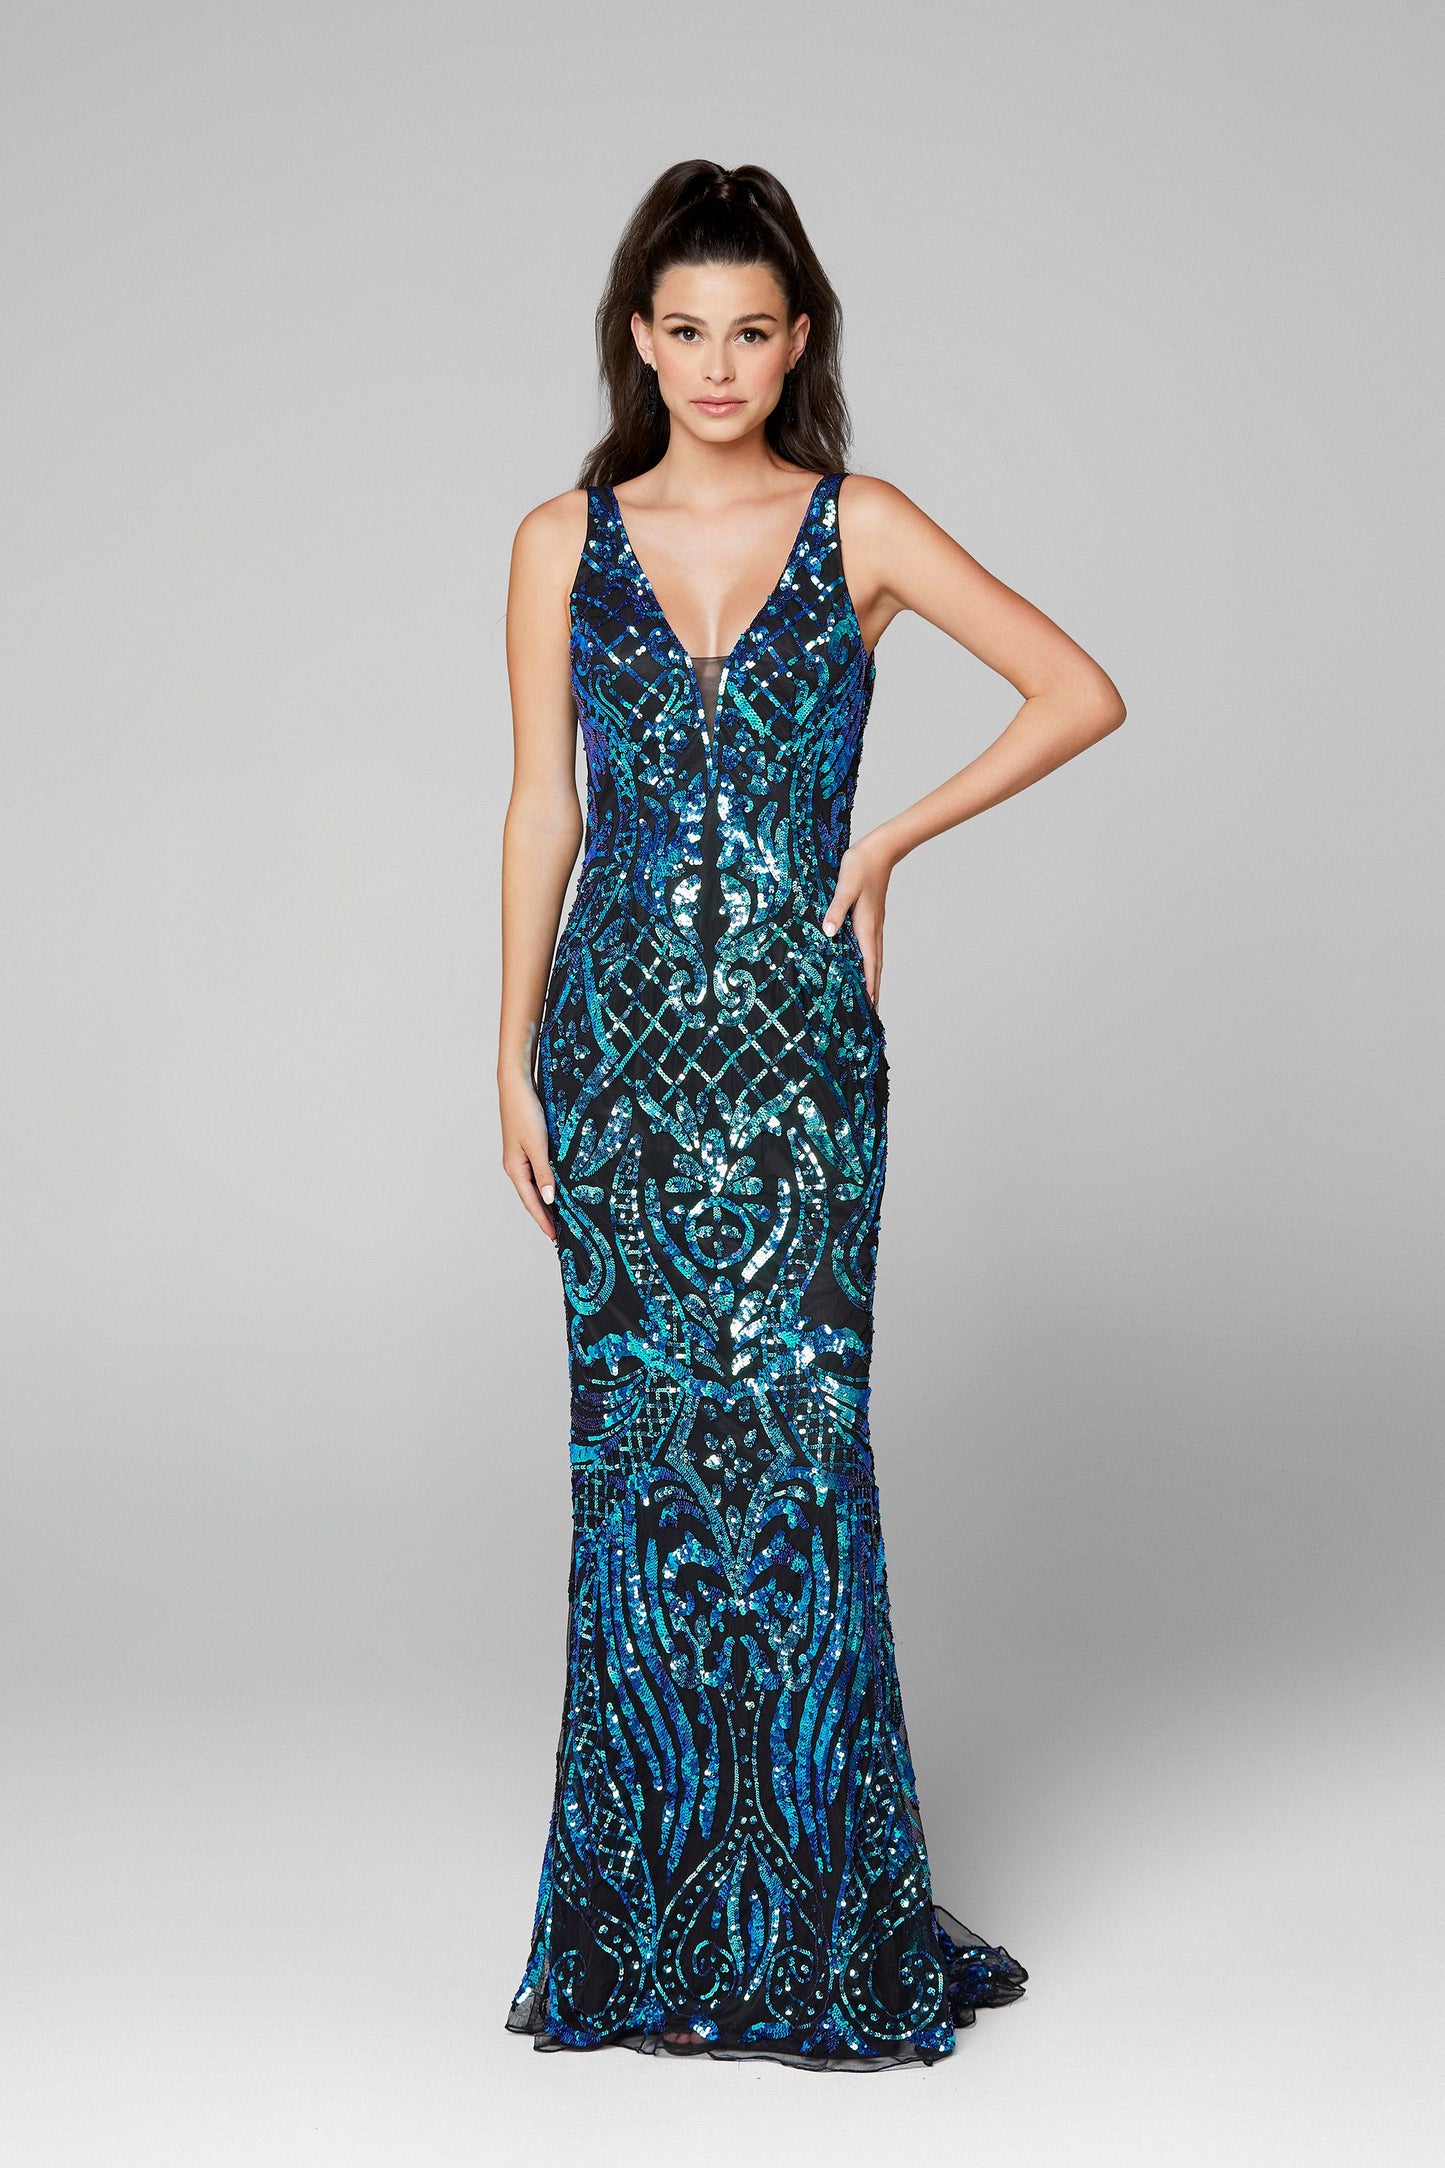 Primavera Couture 3612 is a long Fitted Sequin Embellished Formal Evening Gown. Featuring a Plunging Deep V Neckline. Elegant Sequin Embellishments scroll down throughout the length of this fit & Flare Prom Dress.  Available Sizes: 00,0,2,4,6,8,10,12,14,16,18  Available Colors: Black/Blue, Black/Multi, Ivory, Yellow